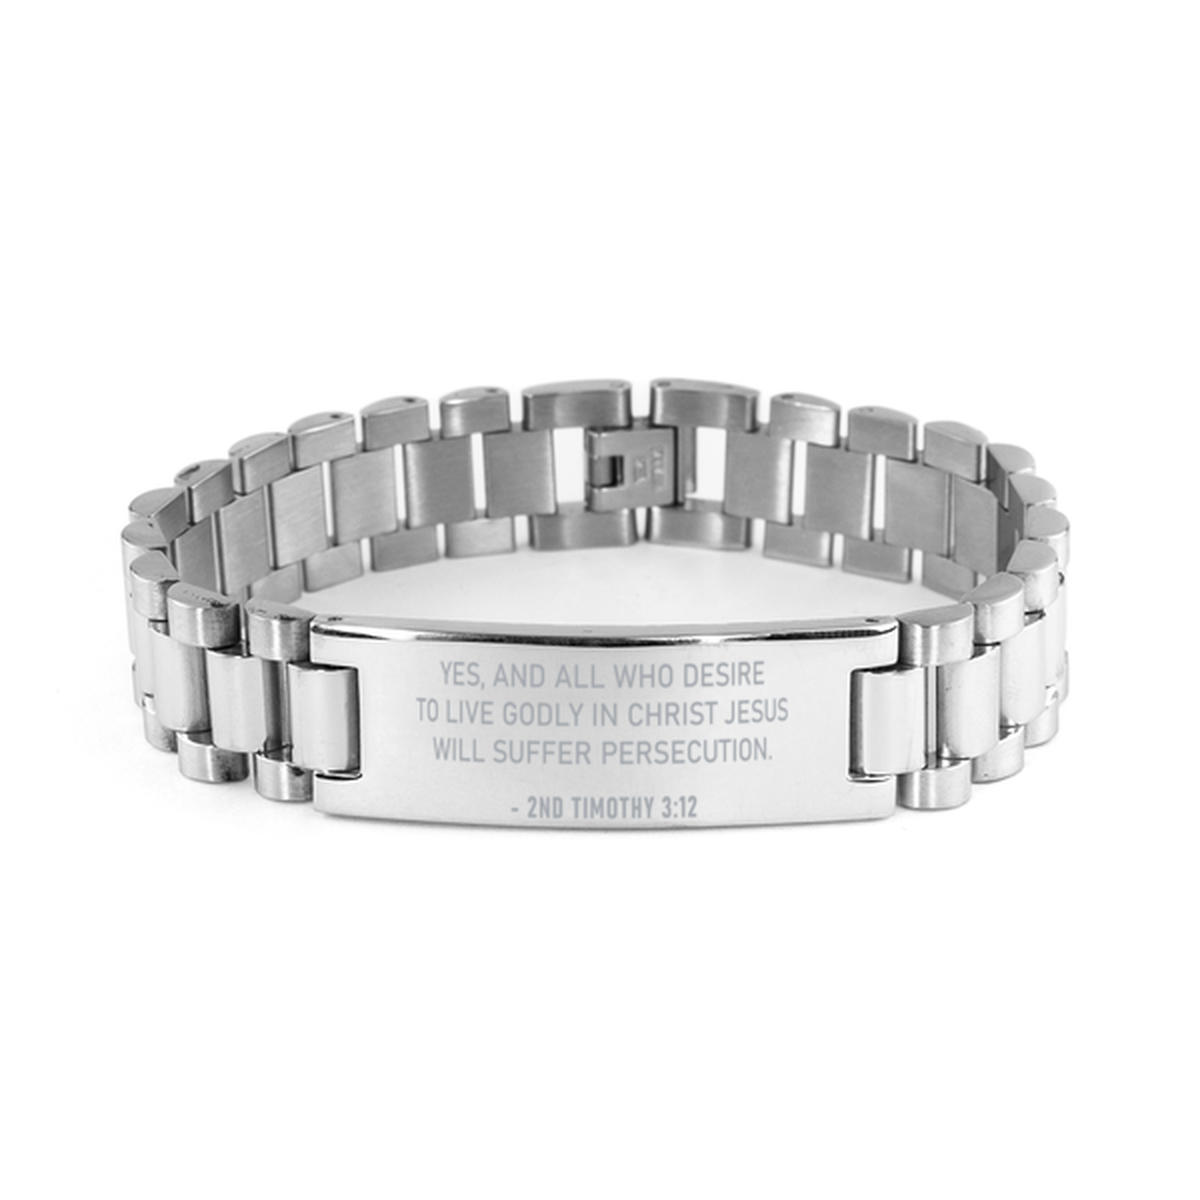 Christian Ladder Stainless Steel Bracelet, 2Nd Timothy 3:12 Yes, And All Who Desire To Live Godly In Christ, Motivational Bible Verse Gifts For Men Women